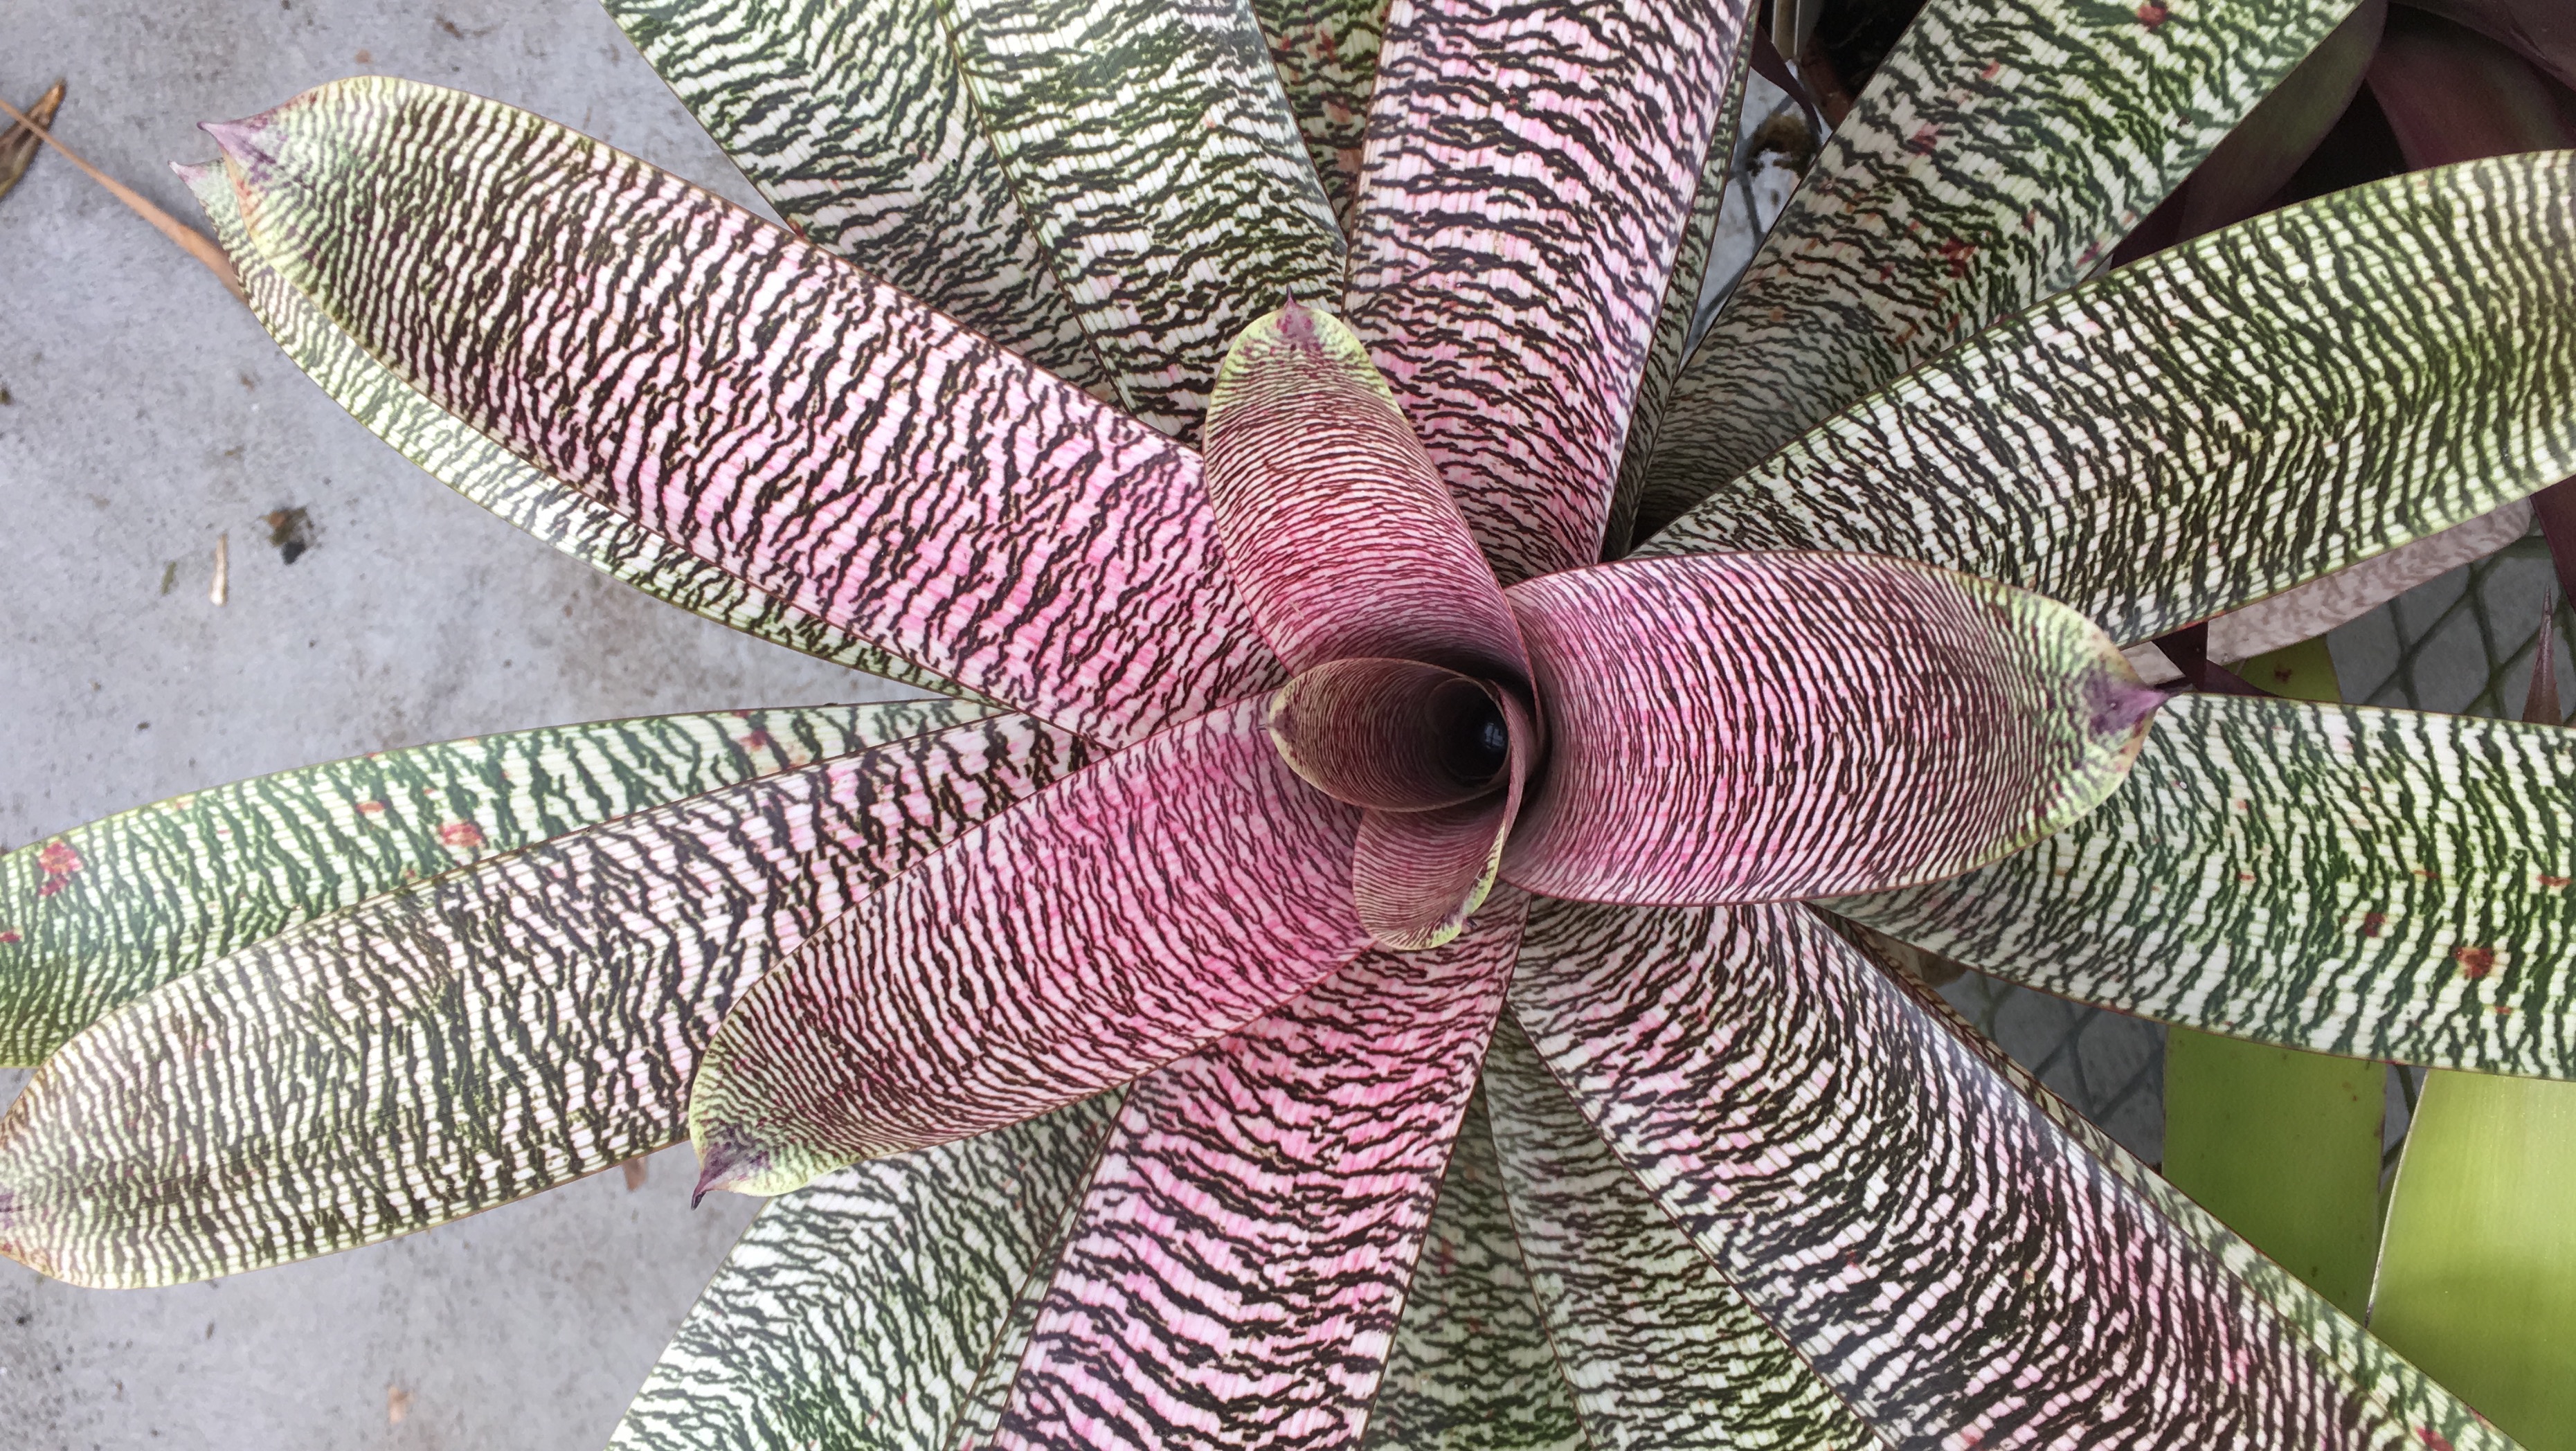 Bromeliad specimen from research with Dr. Rachel Jabaily. <span class="cc-gallery-credit">[Emma Fetterly]</span>